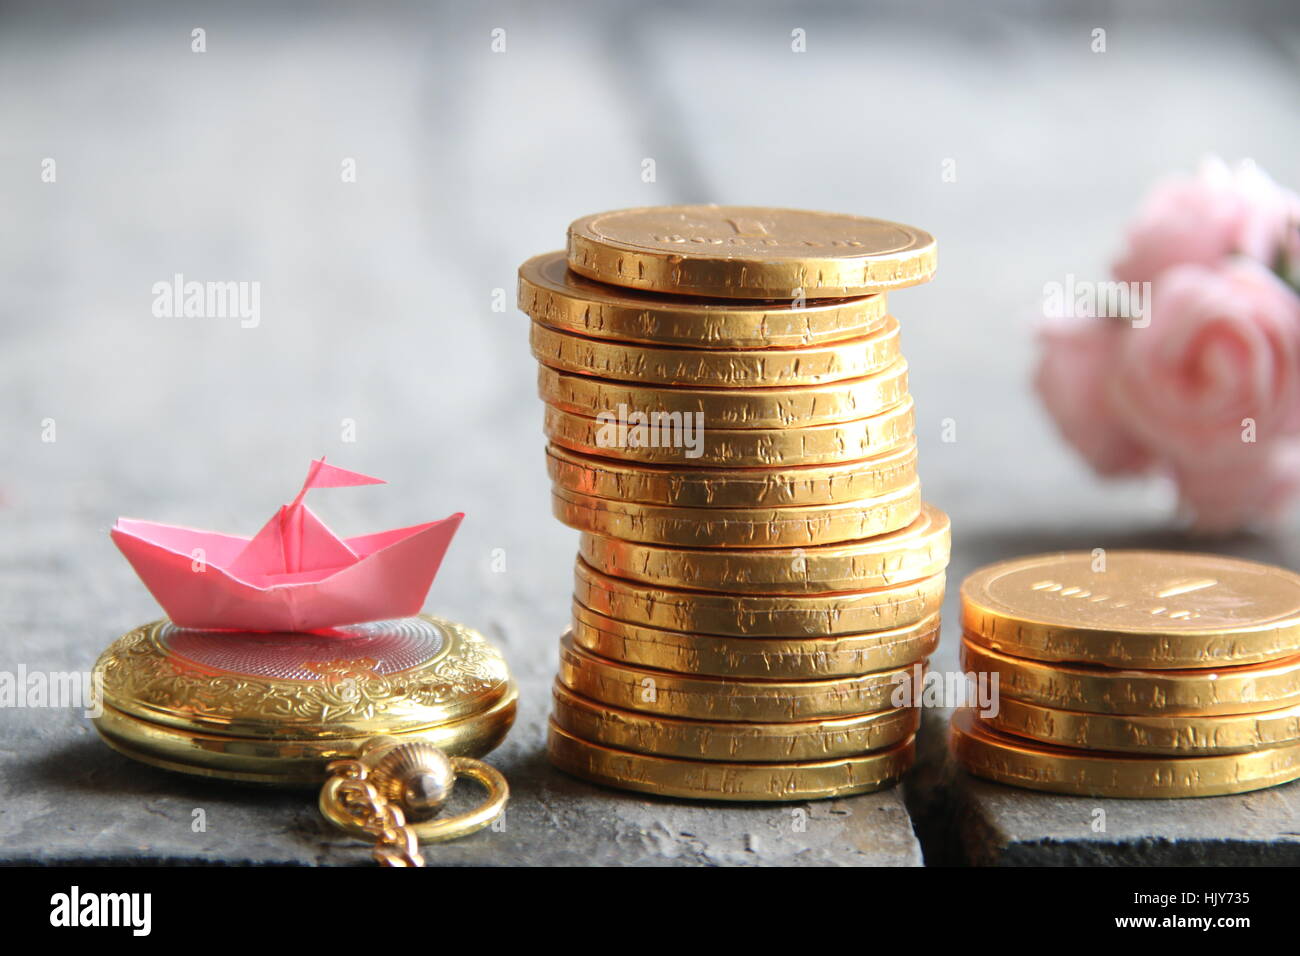 New Business idea. Stacks of golden coins. Stock Photo